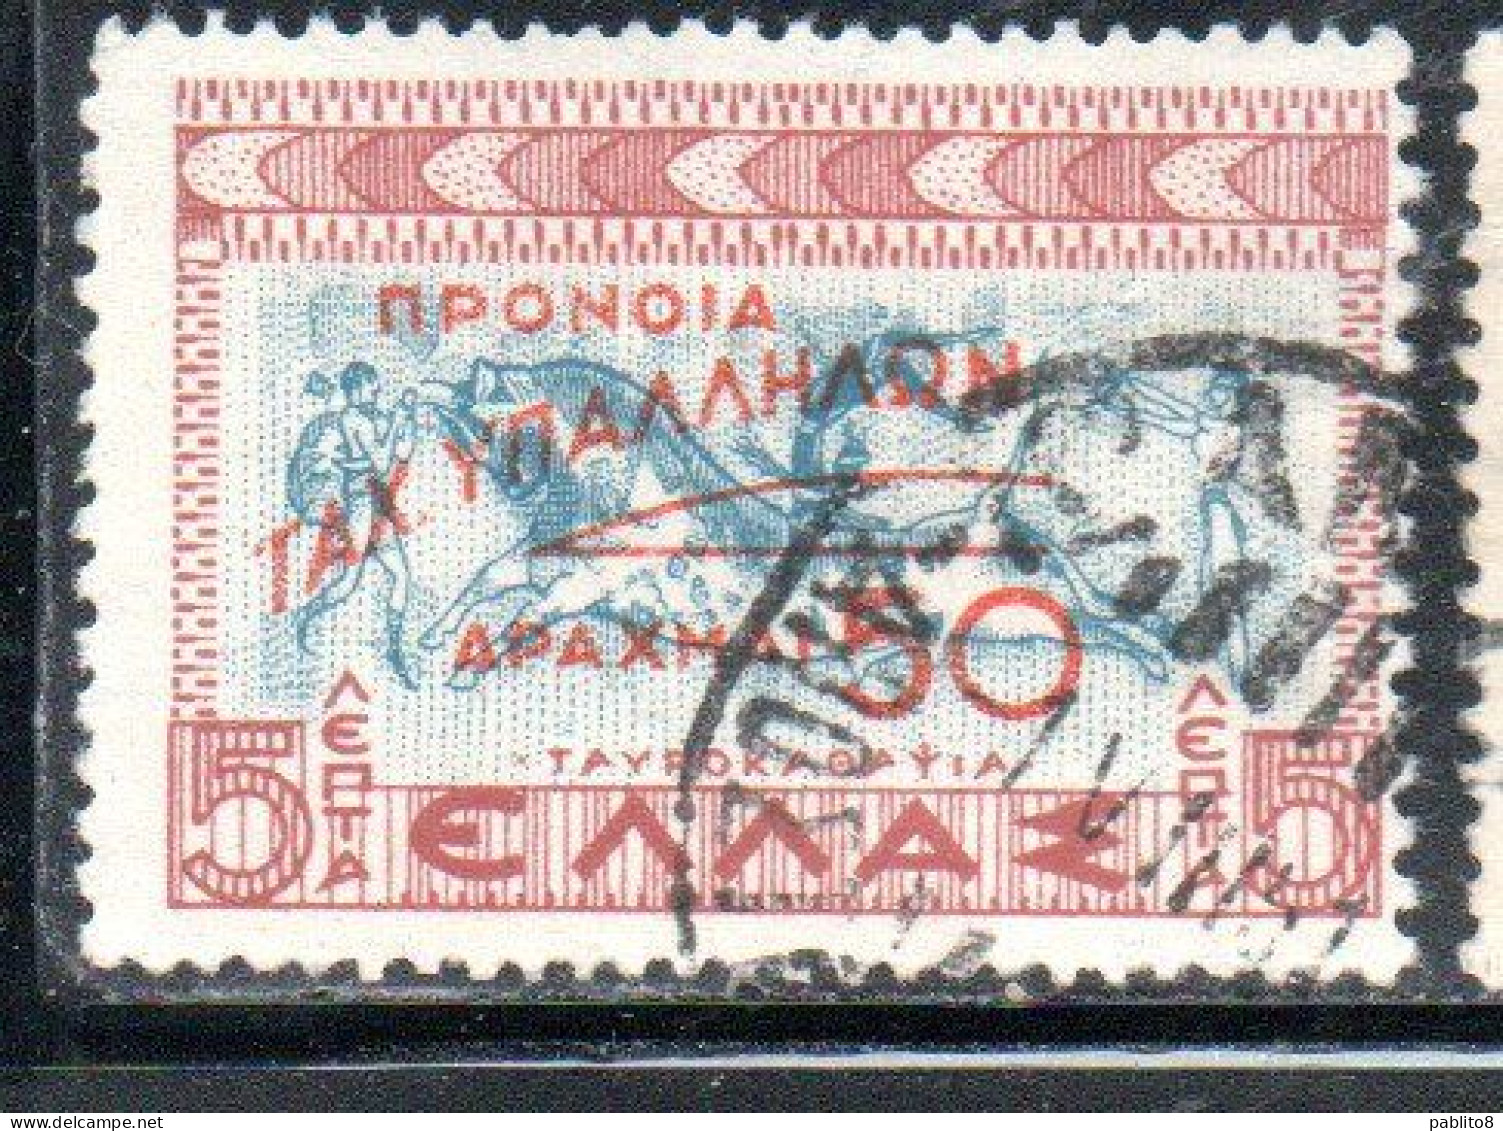 GREECE GRECIA ELLAS 1945 POSTAL TAX STAMPS WELFARE FUND SURCHARGED 50d On 5l USED USATO OBLITERE' - Fiscali